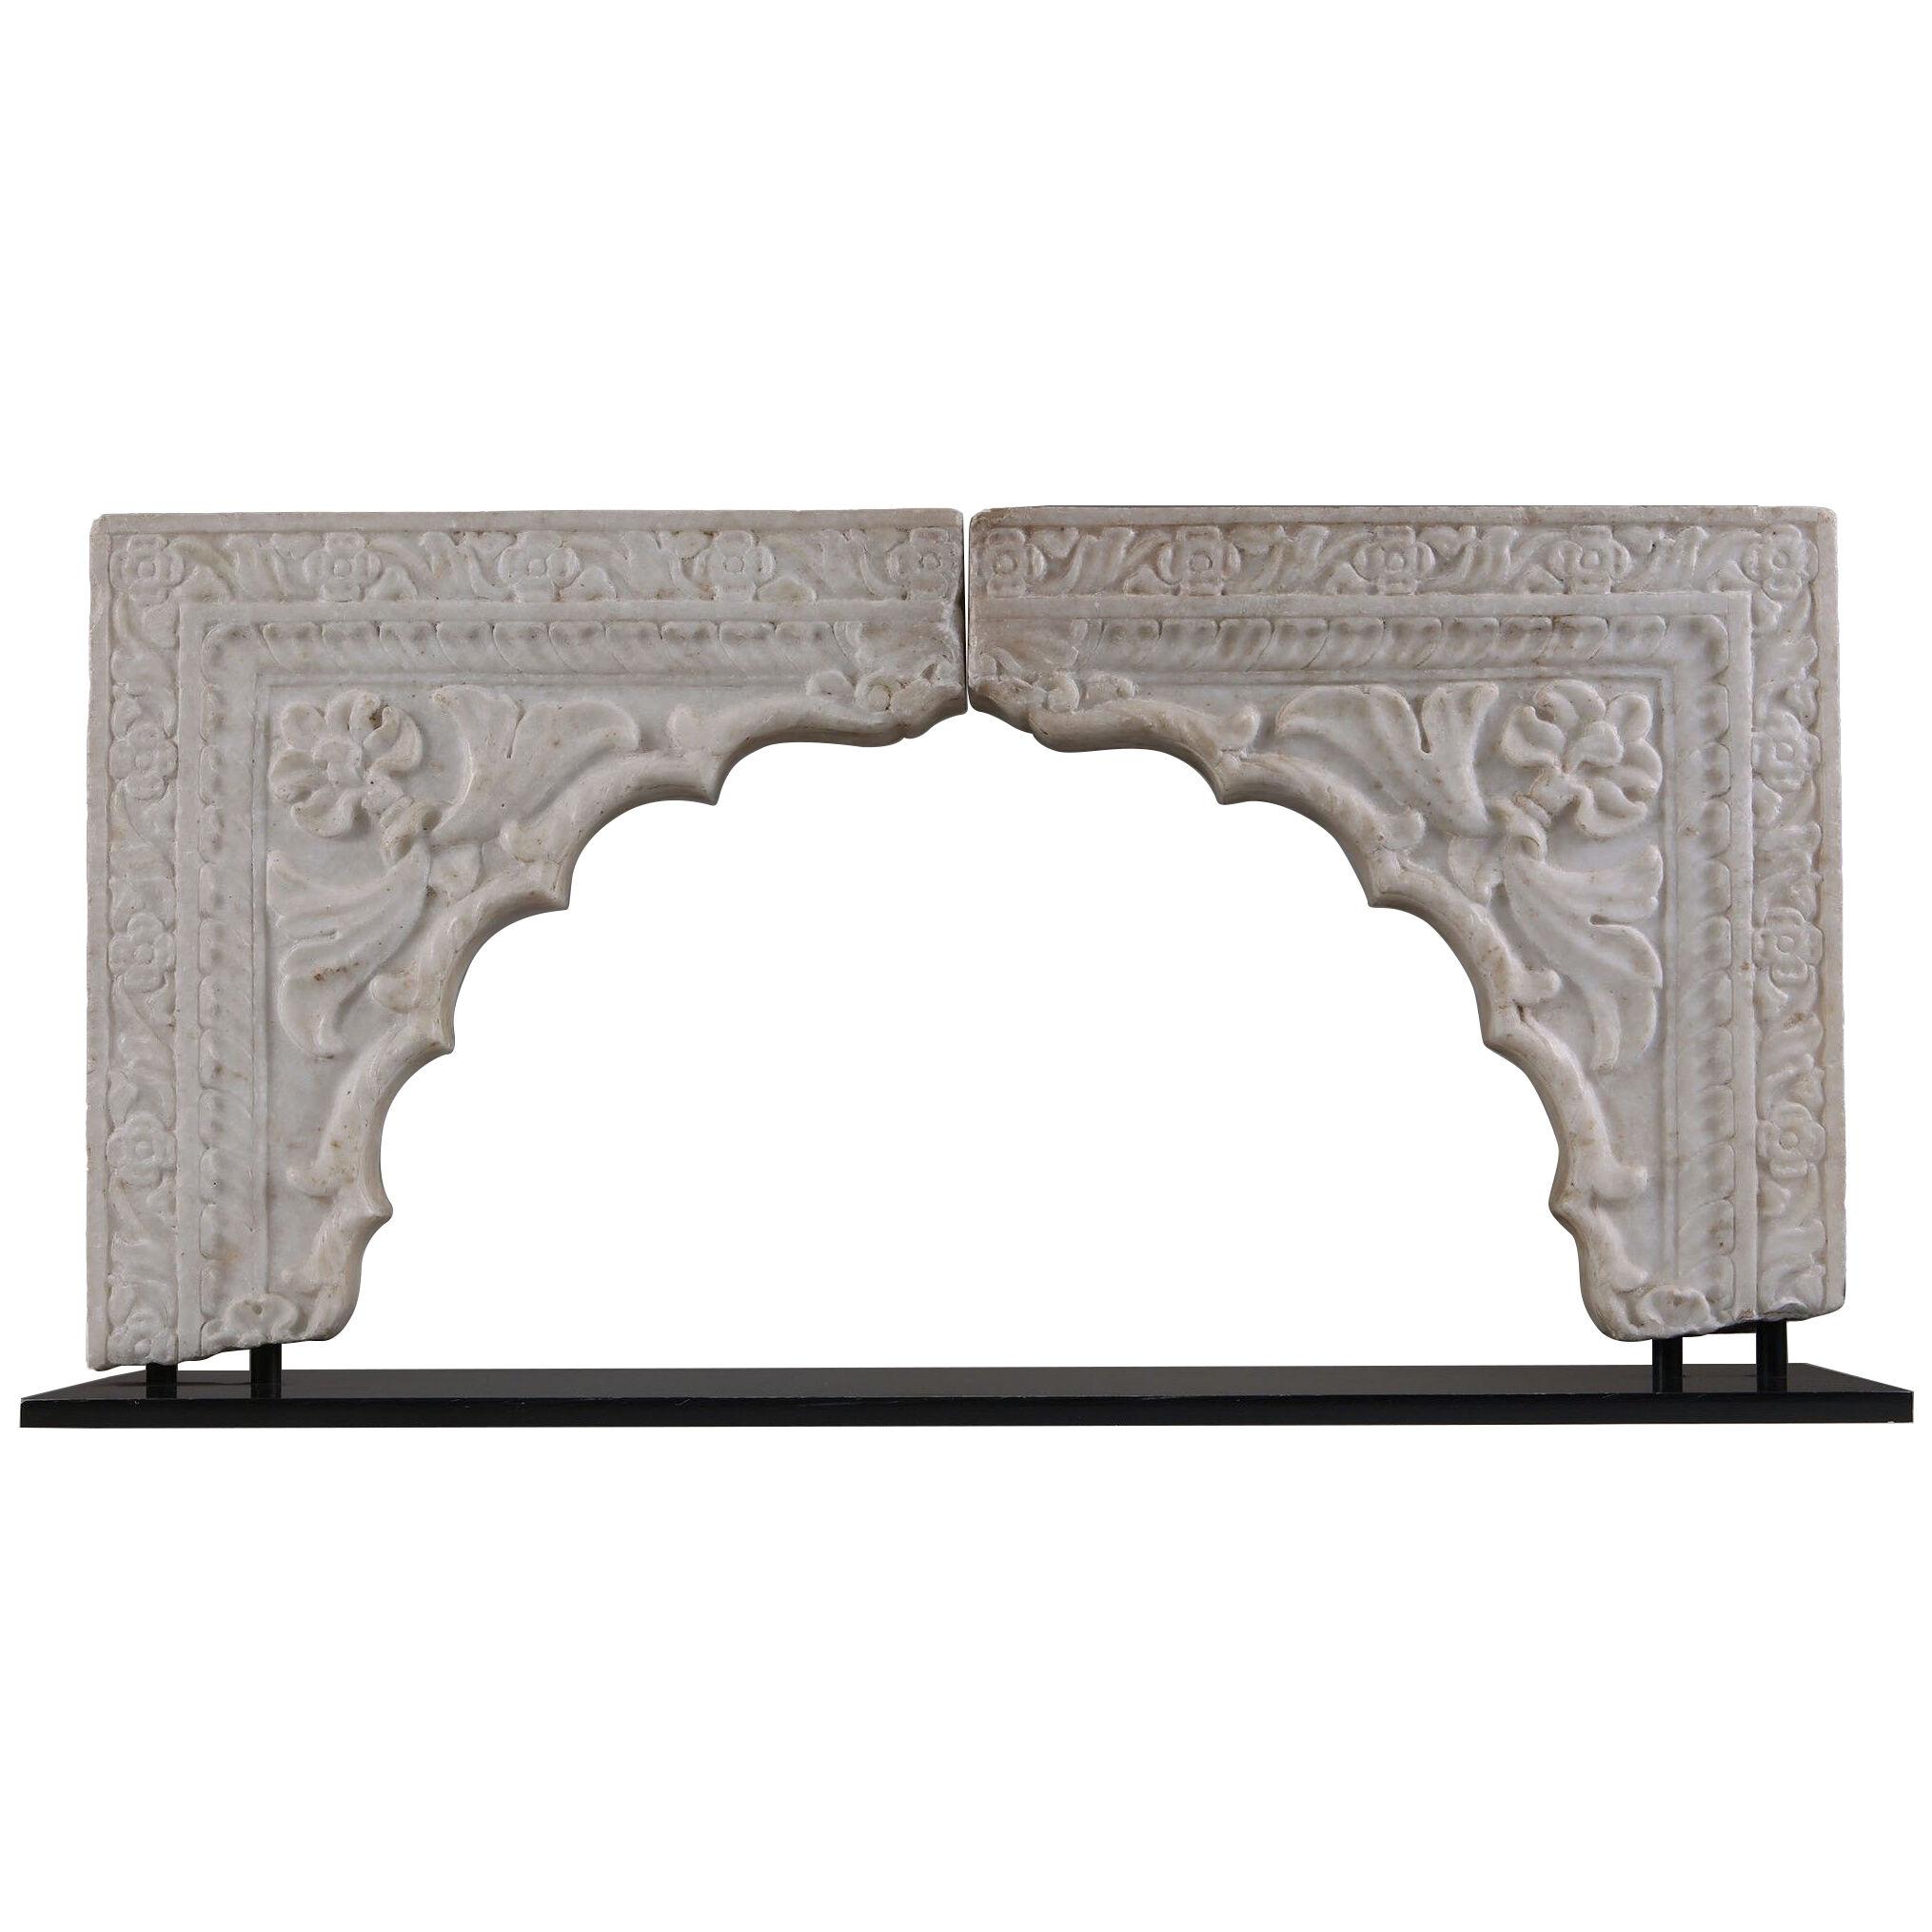 An 18th century Mughal Indian marble arch